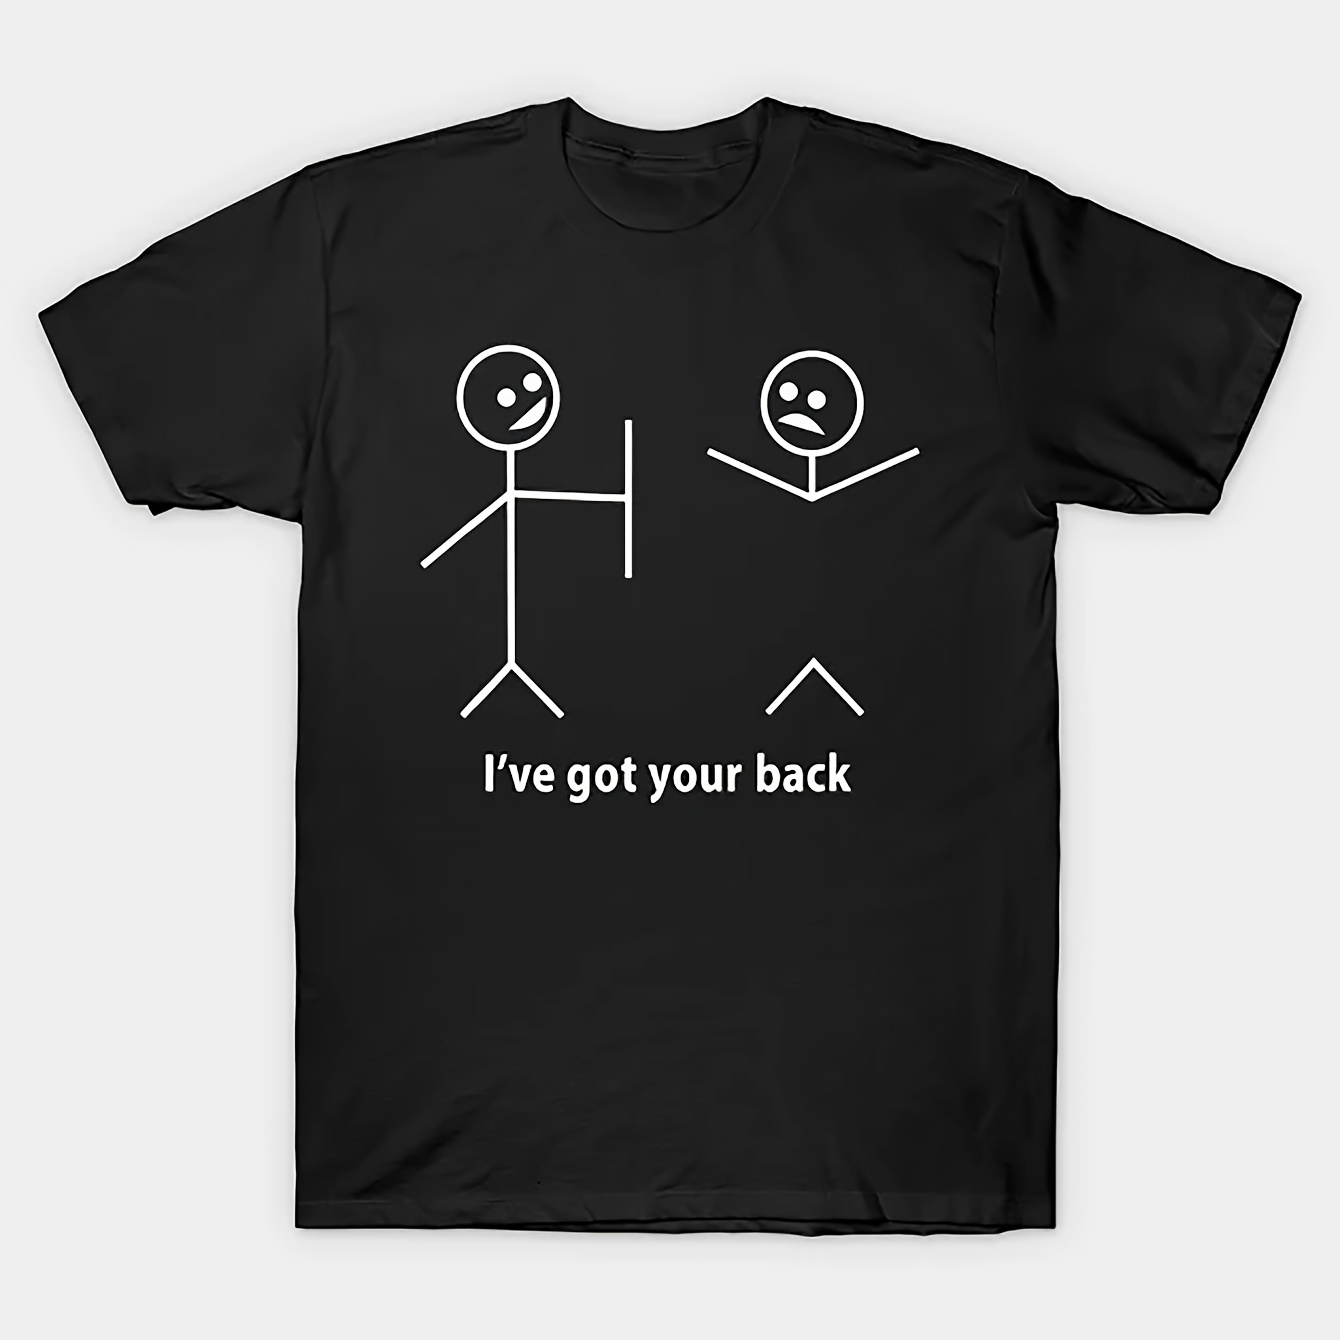 

I've Got Your Back " Funny Print Tee Shirt, Tees For Men, Casual Short Sleeve T-shirt For Summer